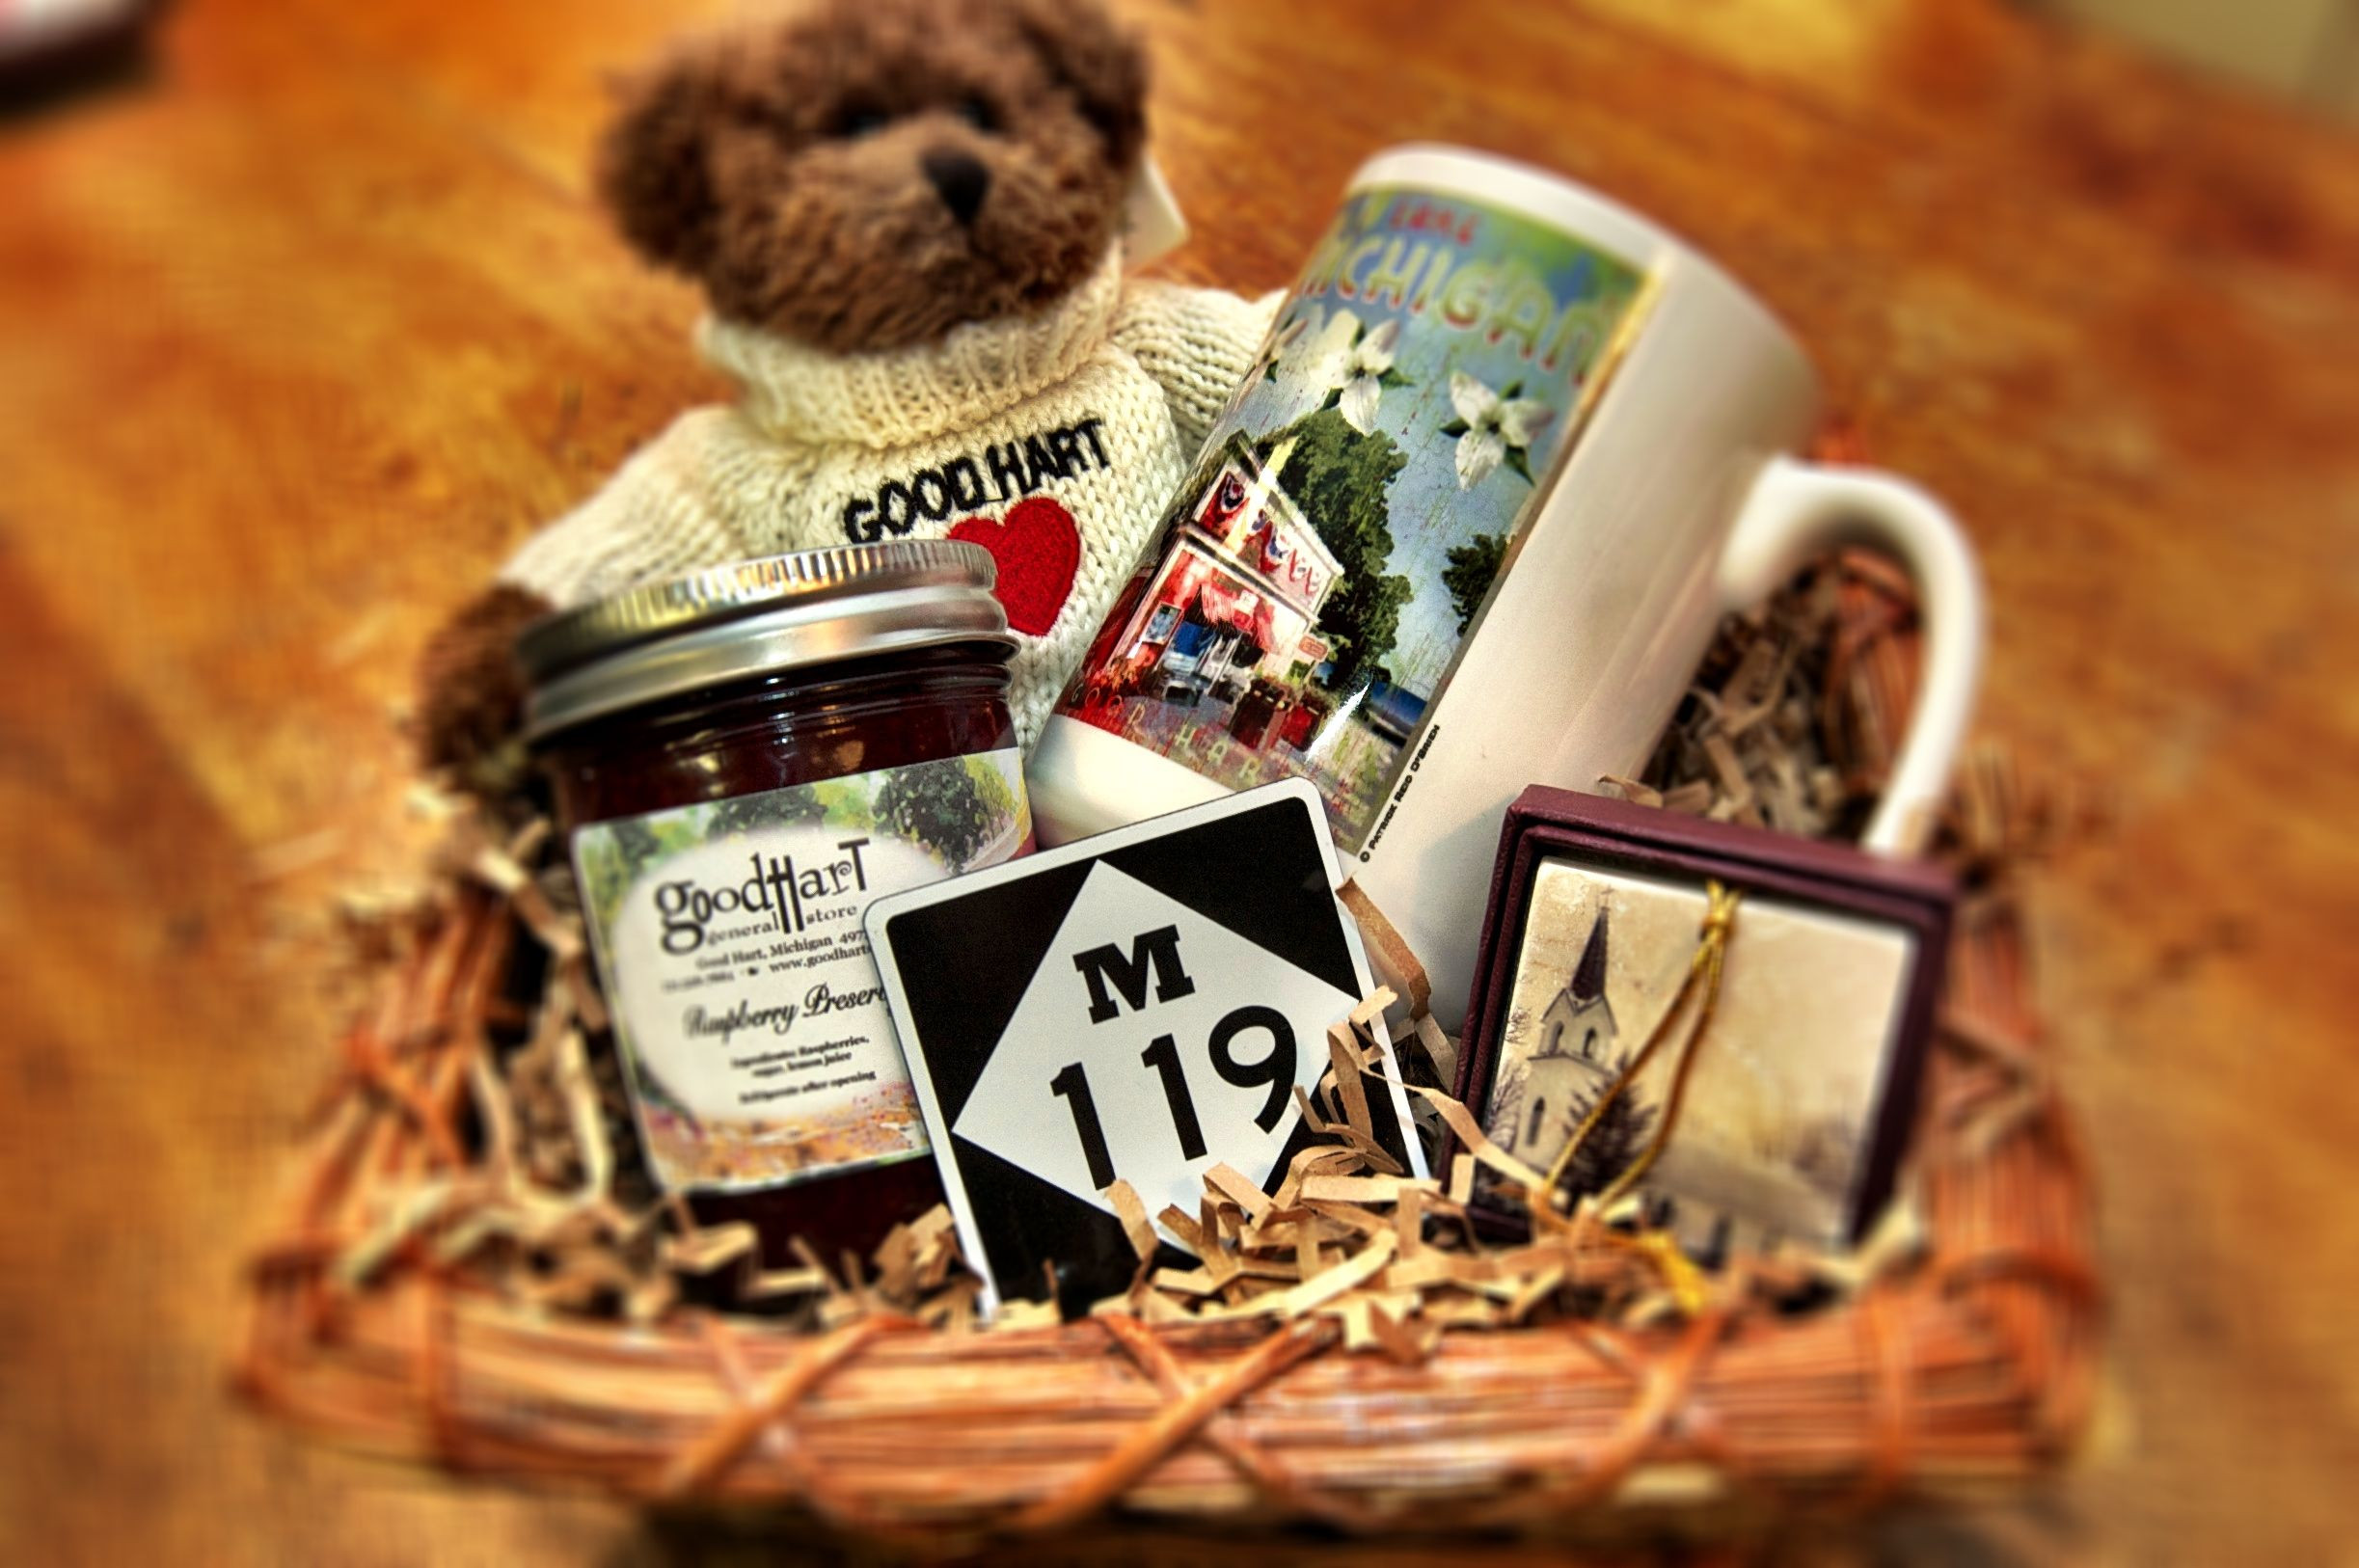 $50 Gift Basket Ideas
 The Gooder In Good Hart t basket $50 Available to